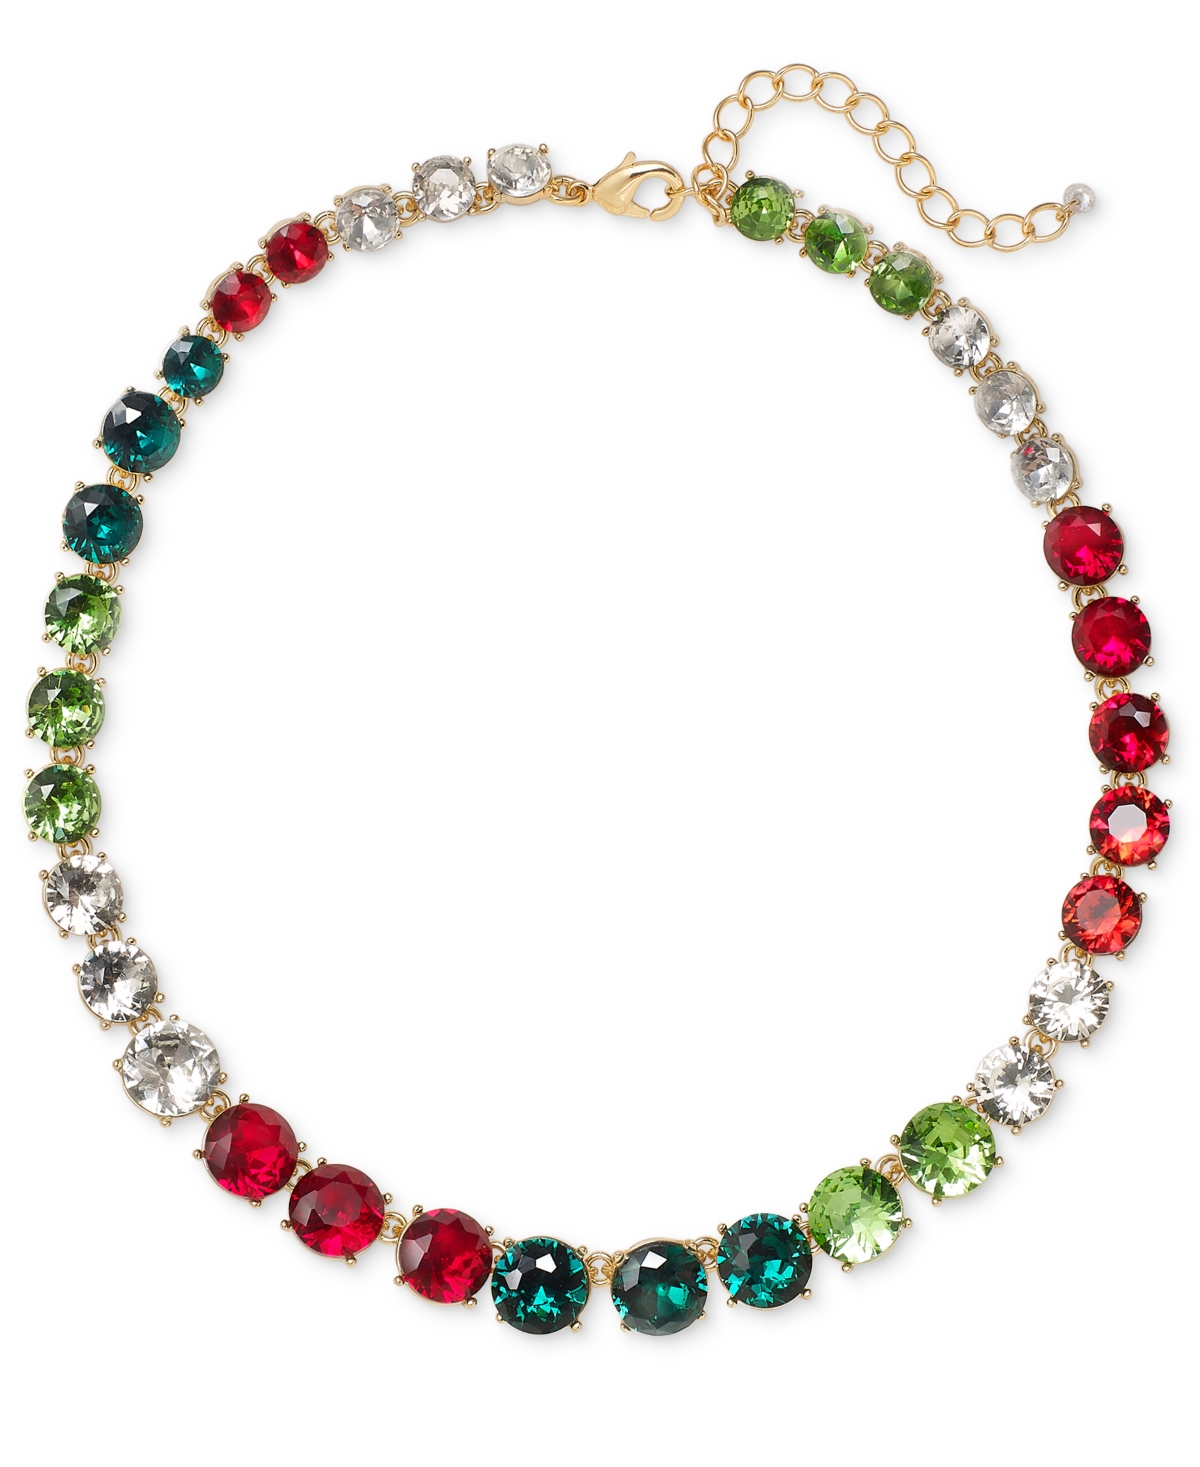 Holiday Lane Gold-tone Multicolor Crystal All-around Collar Necklace, 17" + 3" Extender, Created For Macy's